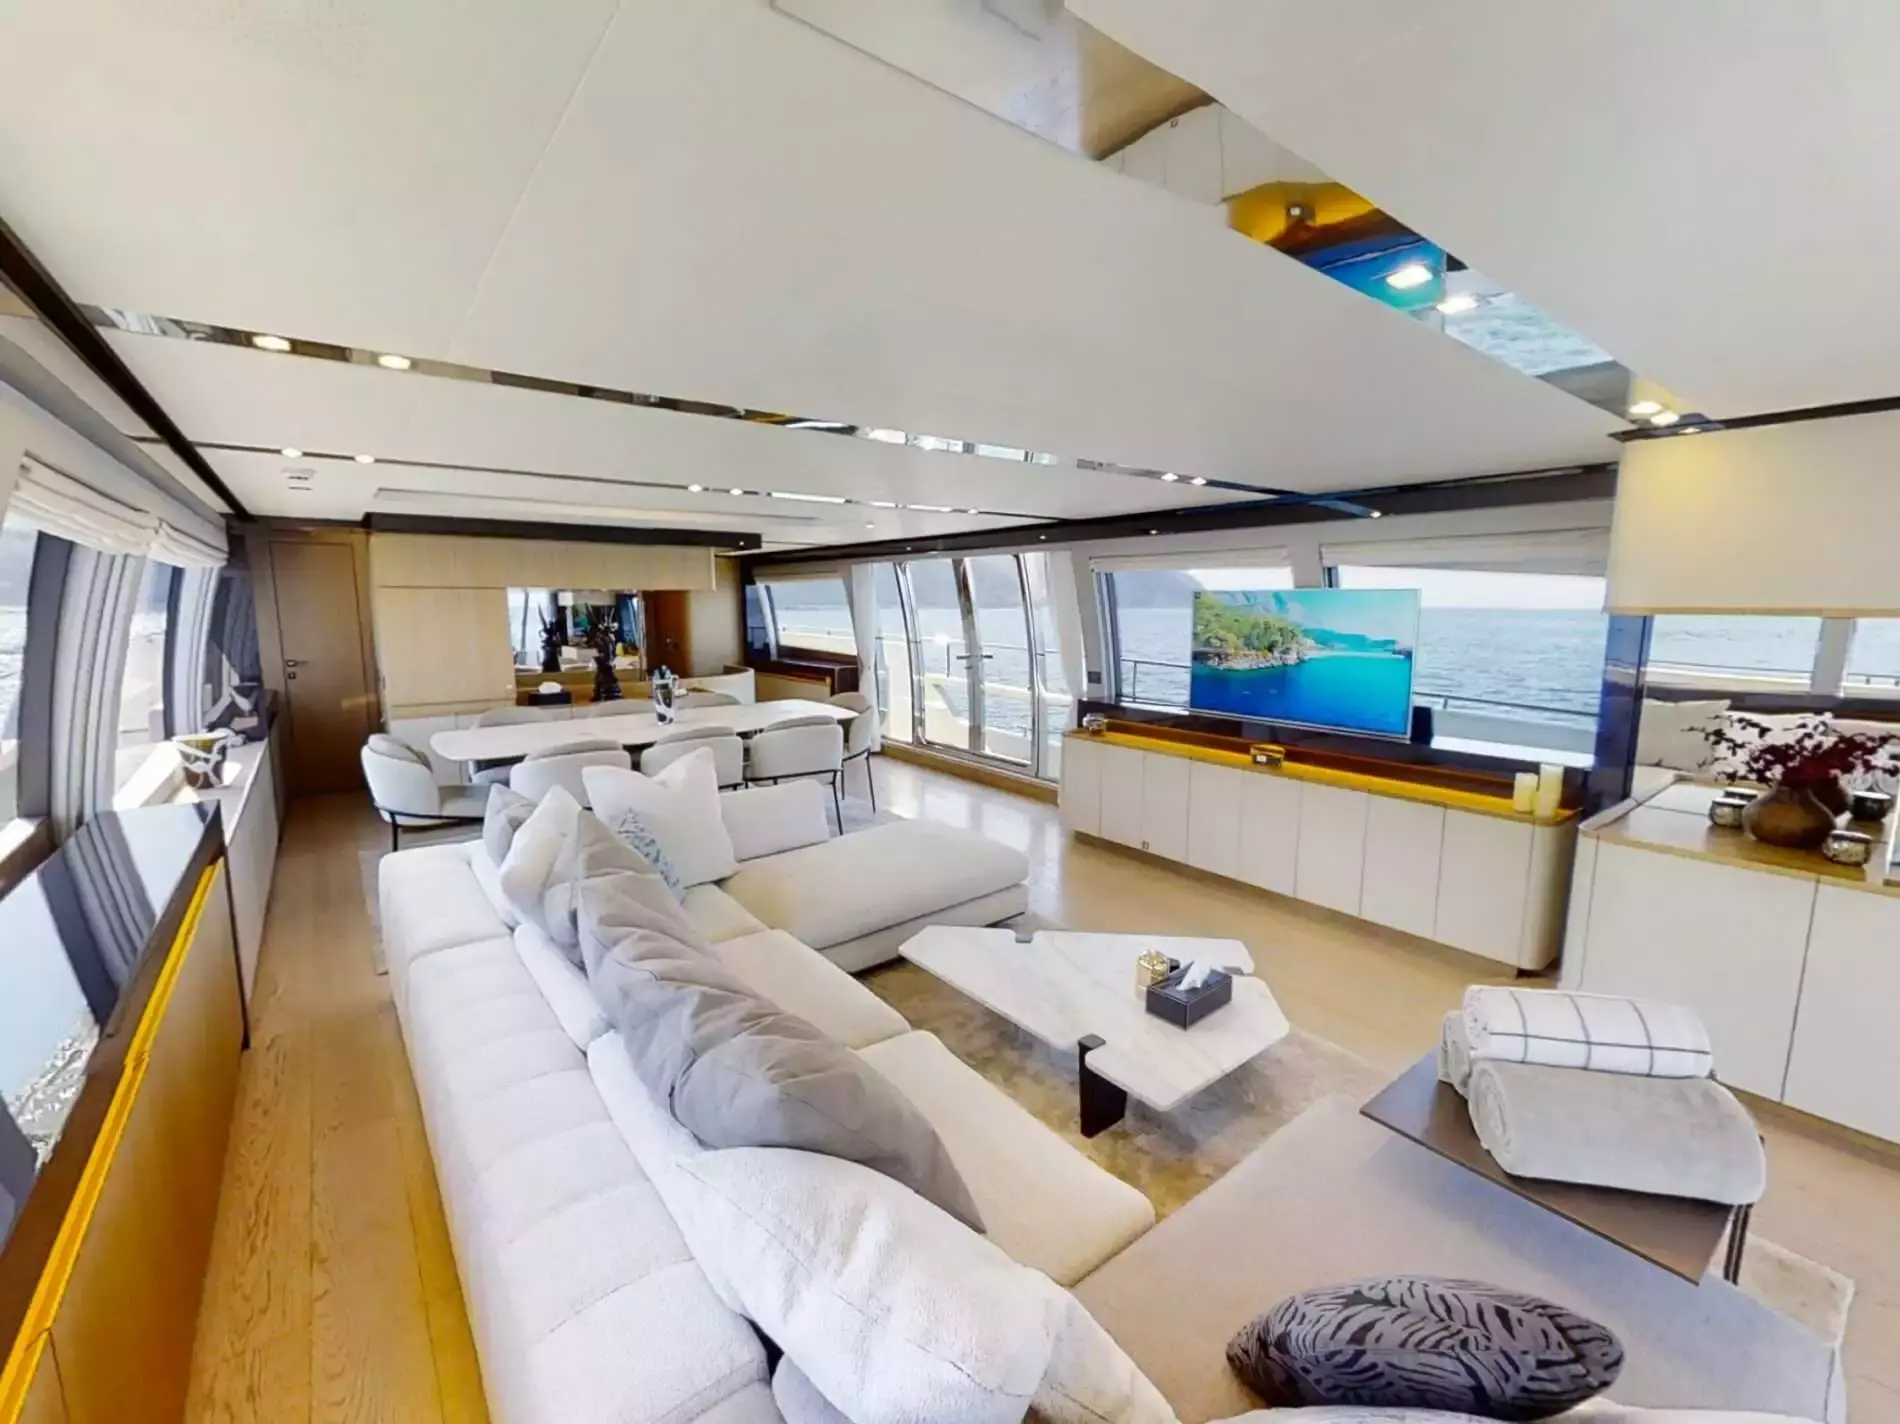 Damari by Ferretti - Top rates for a Rental of a private Superyacht in Italy